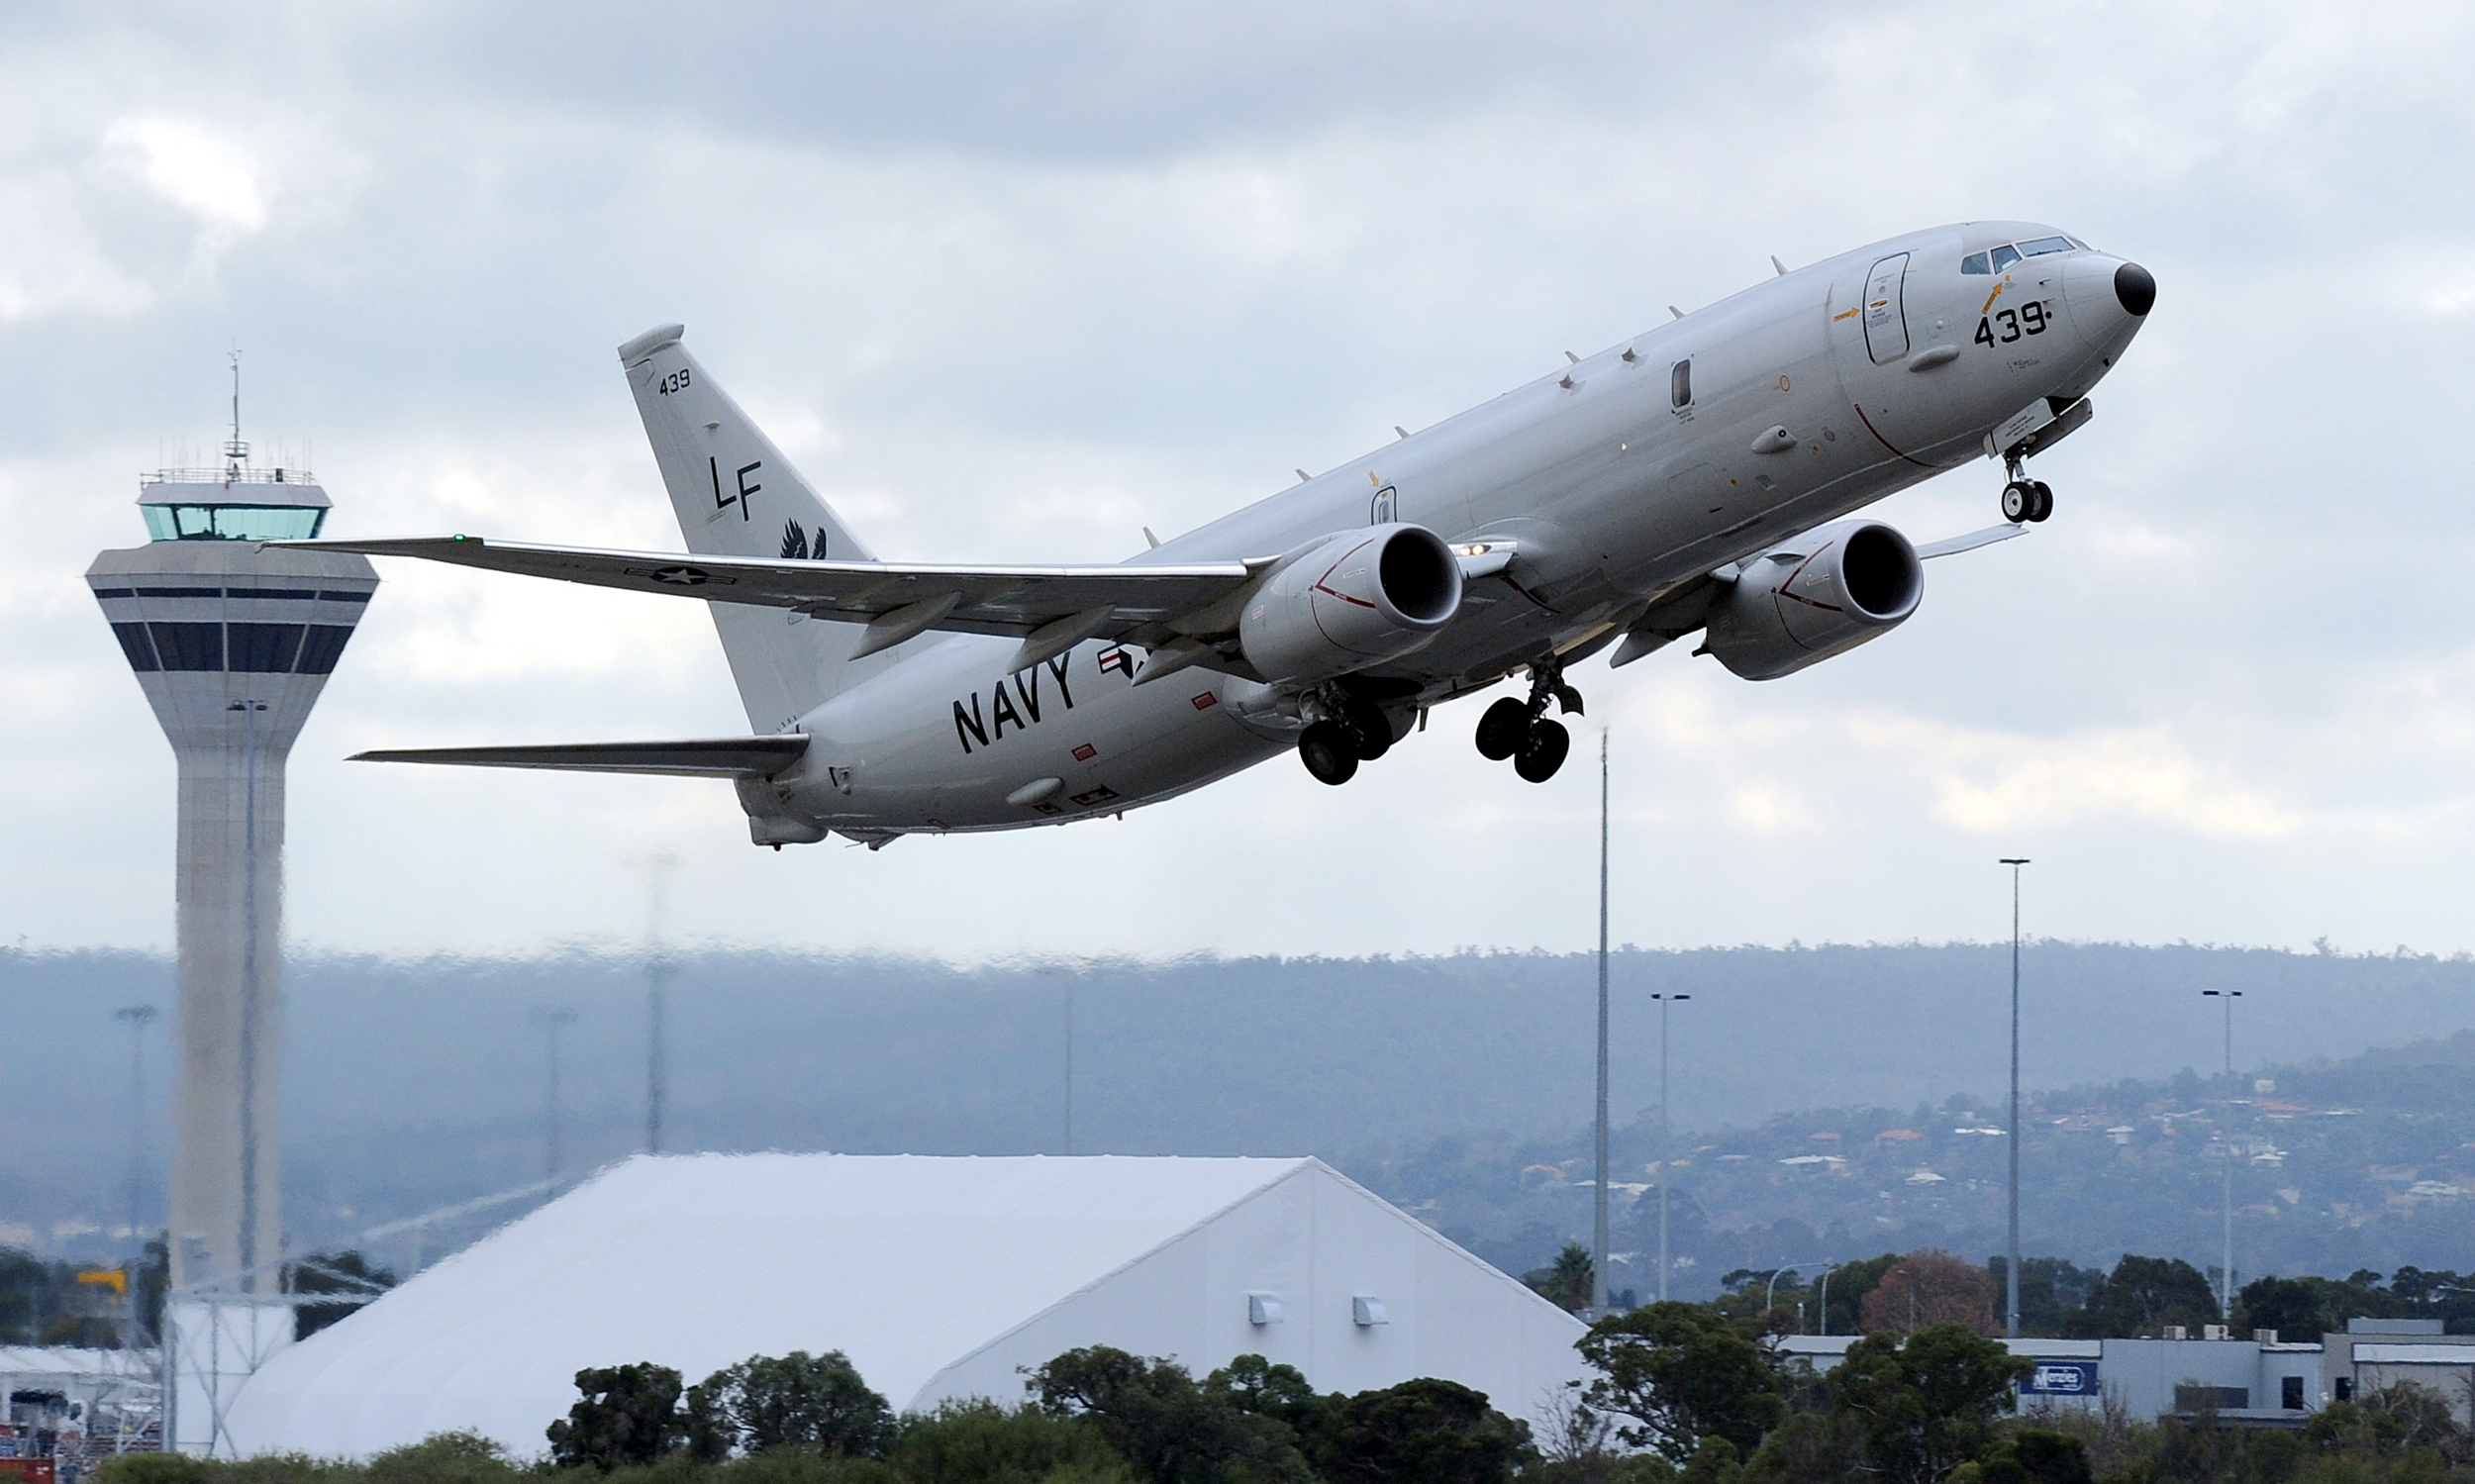 A U.S. Navy P-8 Poseidon aircraft takes off from Perth International Airport on April 16, 2014. (Pool—Reuters)